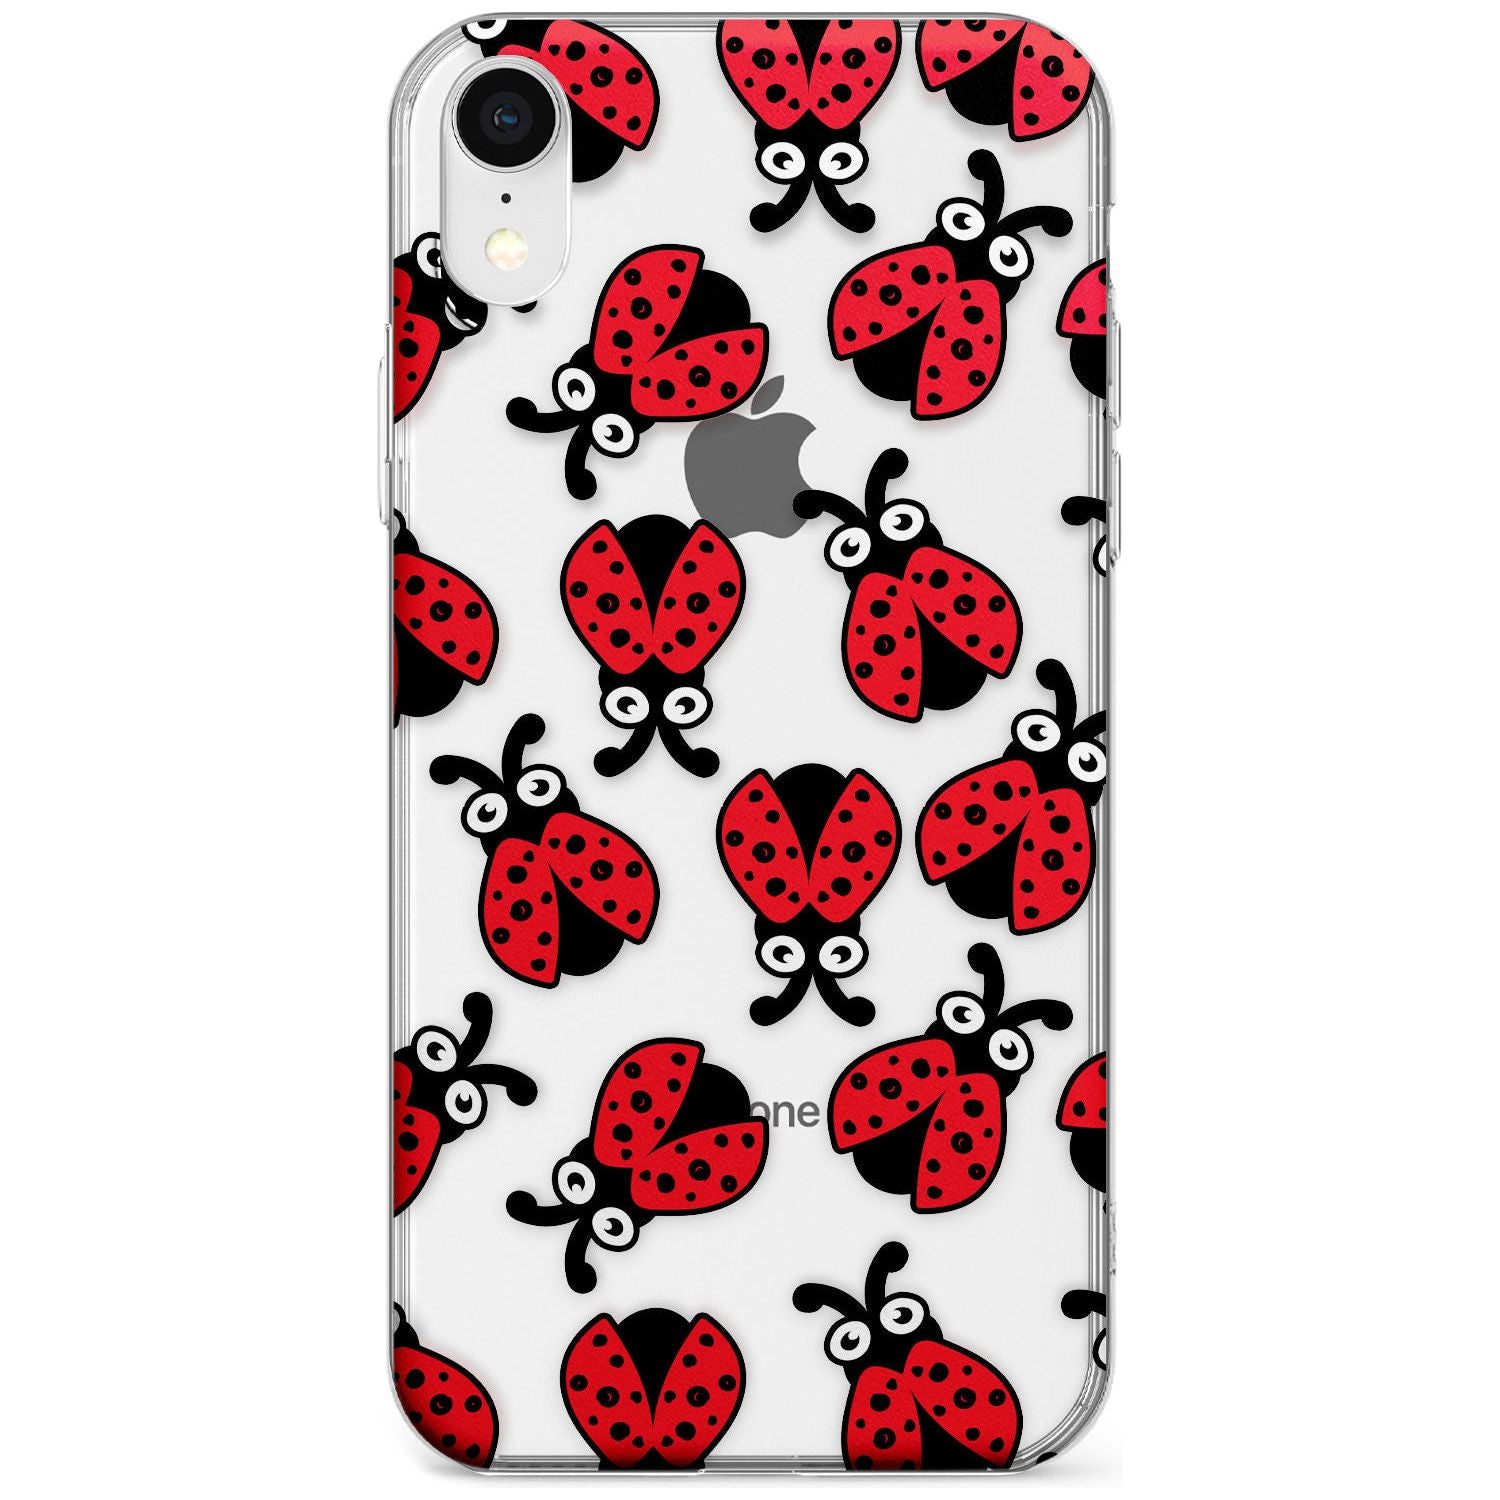 Ladybug Pattern Phone Case for iPhone X XS Max XR